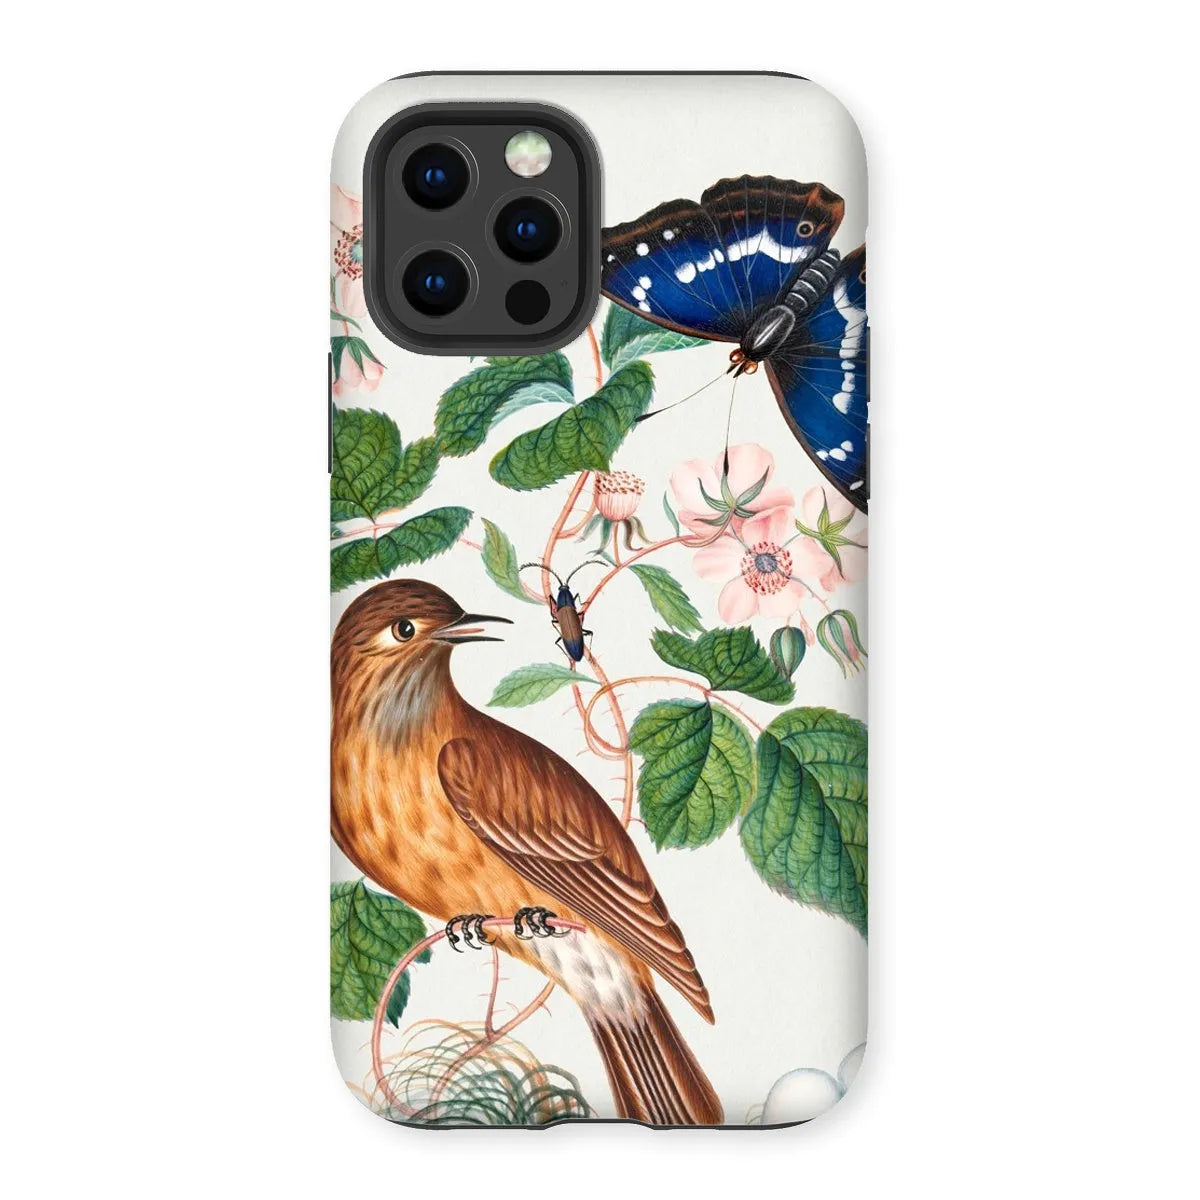 Flycatcher Emperor And Beetle - Art Phone Case - James Bolton - Iphone 12 Pro / Matte - Mobile Phone Cases - Aesthetic